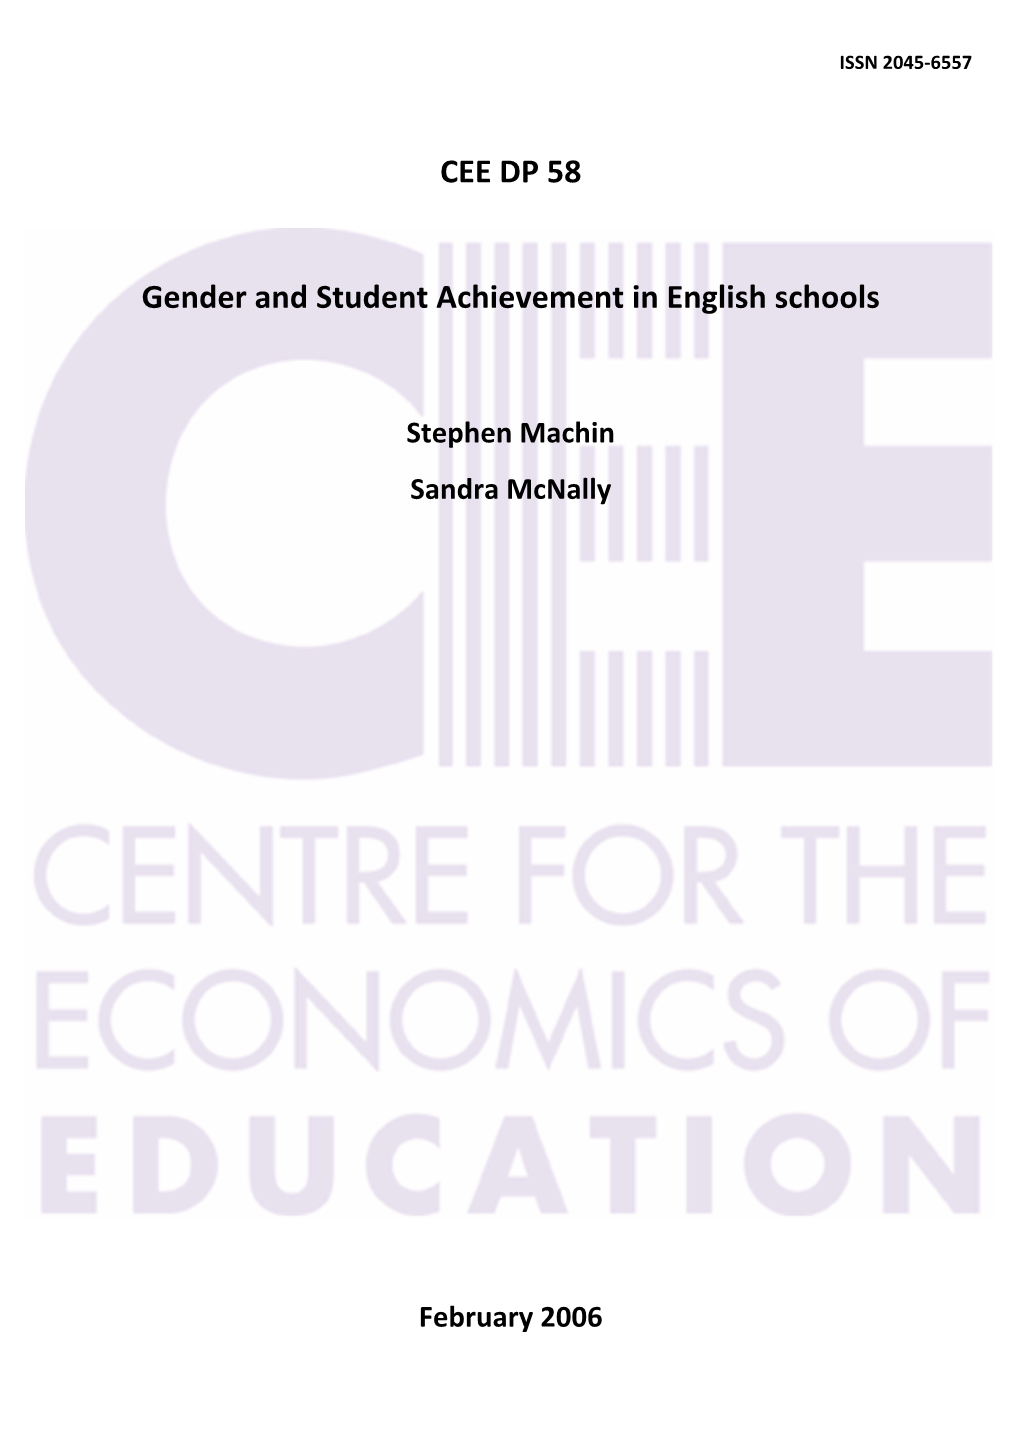 Gender and Student Achievement in English Schools